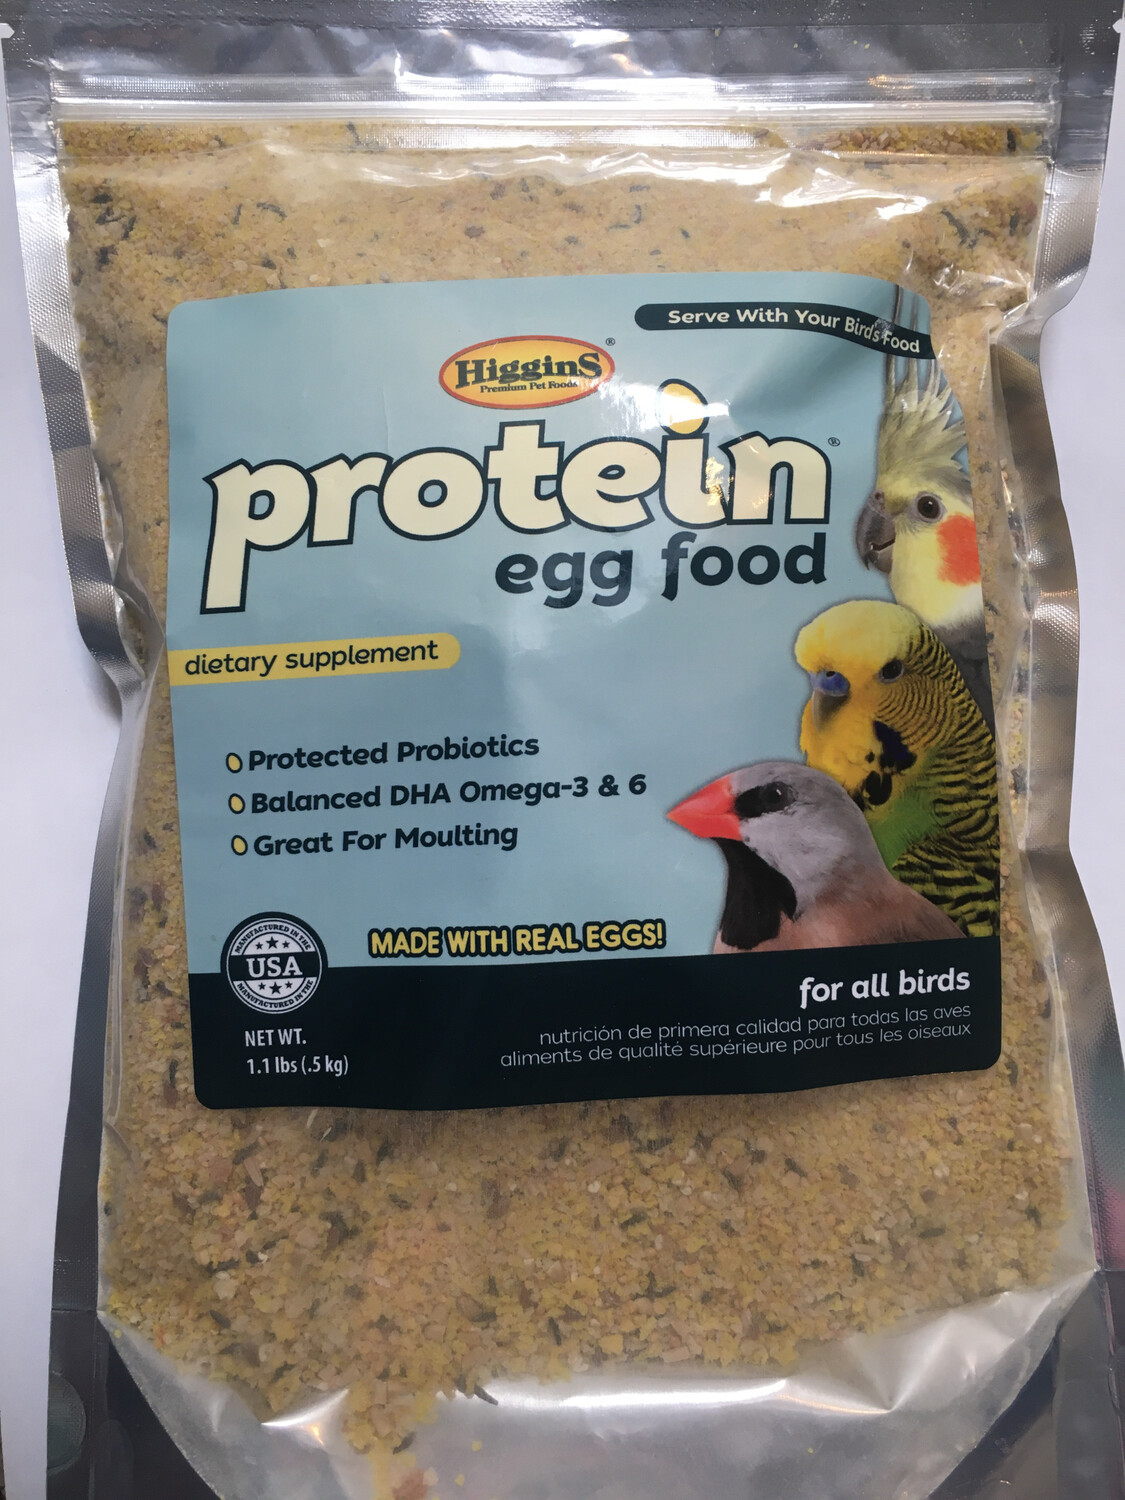  Protein Egg Food